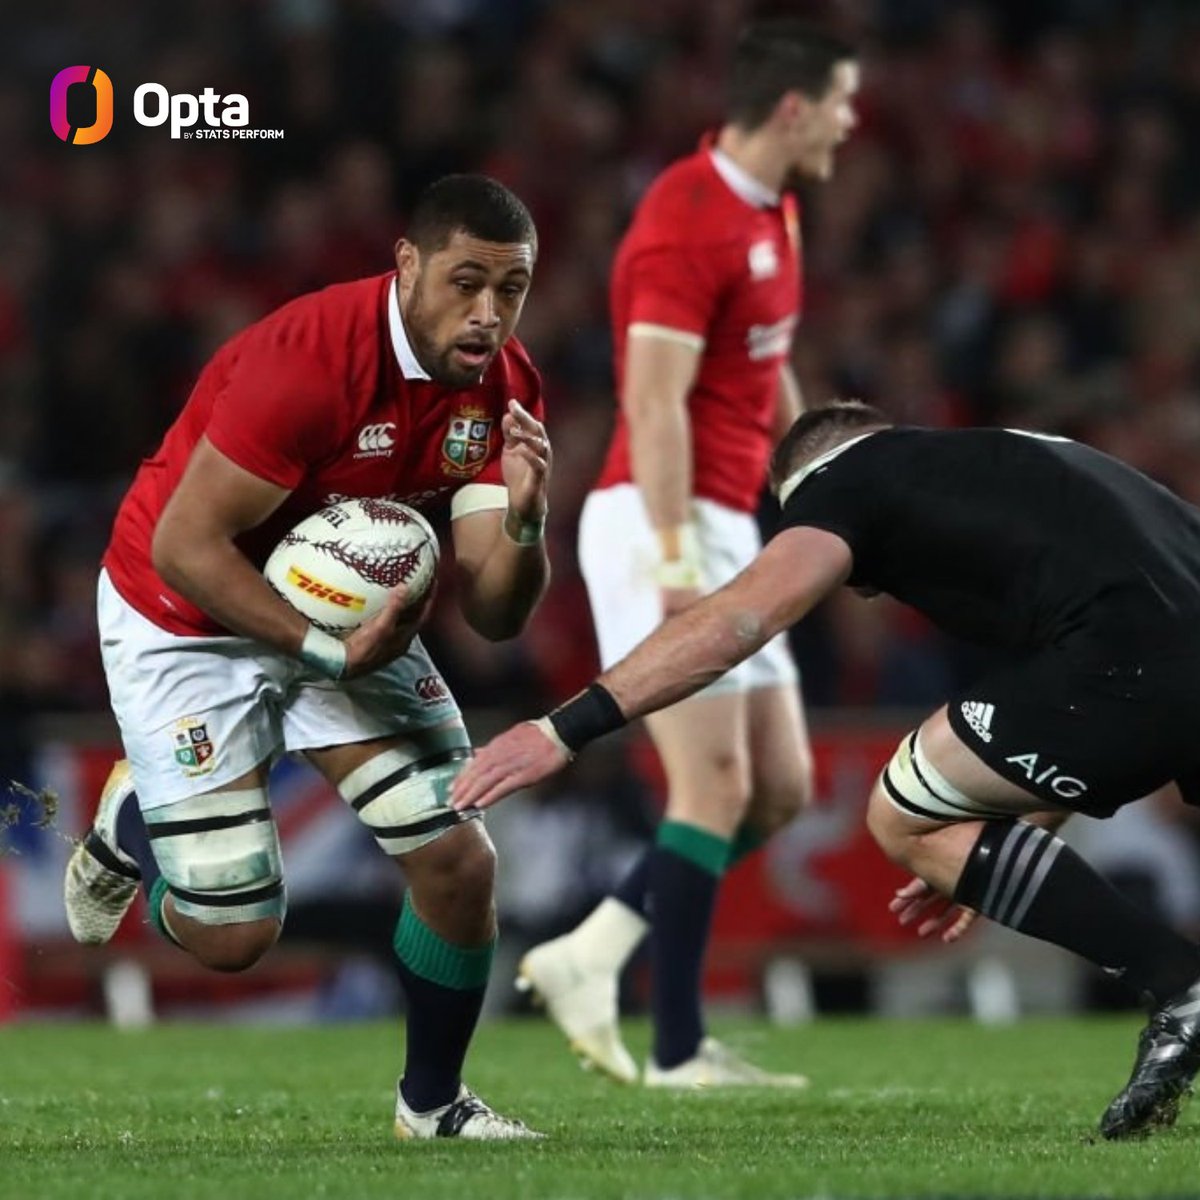 26 - @WelshRugbyUnion's Taulupe Faletau made 26 tackles and 15 carries against New Zealand, no player made more in either category during the weekend's Autumn Nations Series fixtures. Tireless.